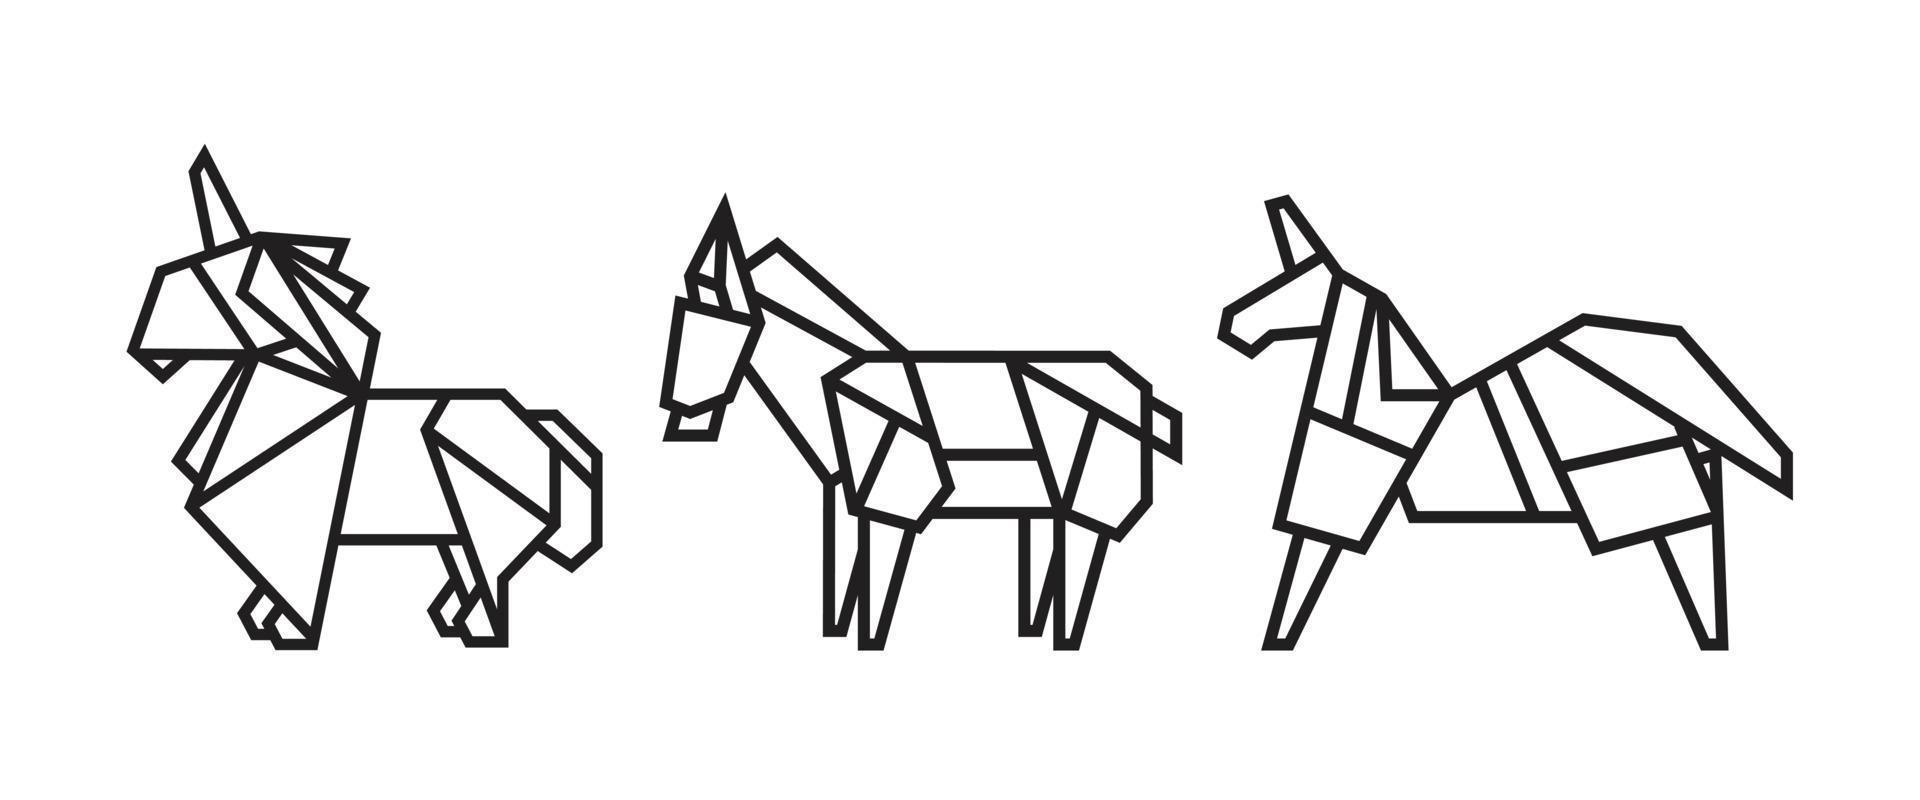 Horses illustrations in origami style vector